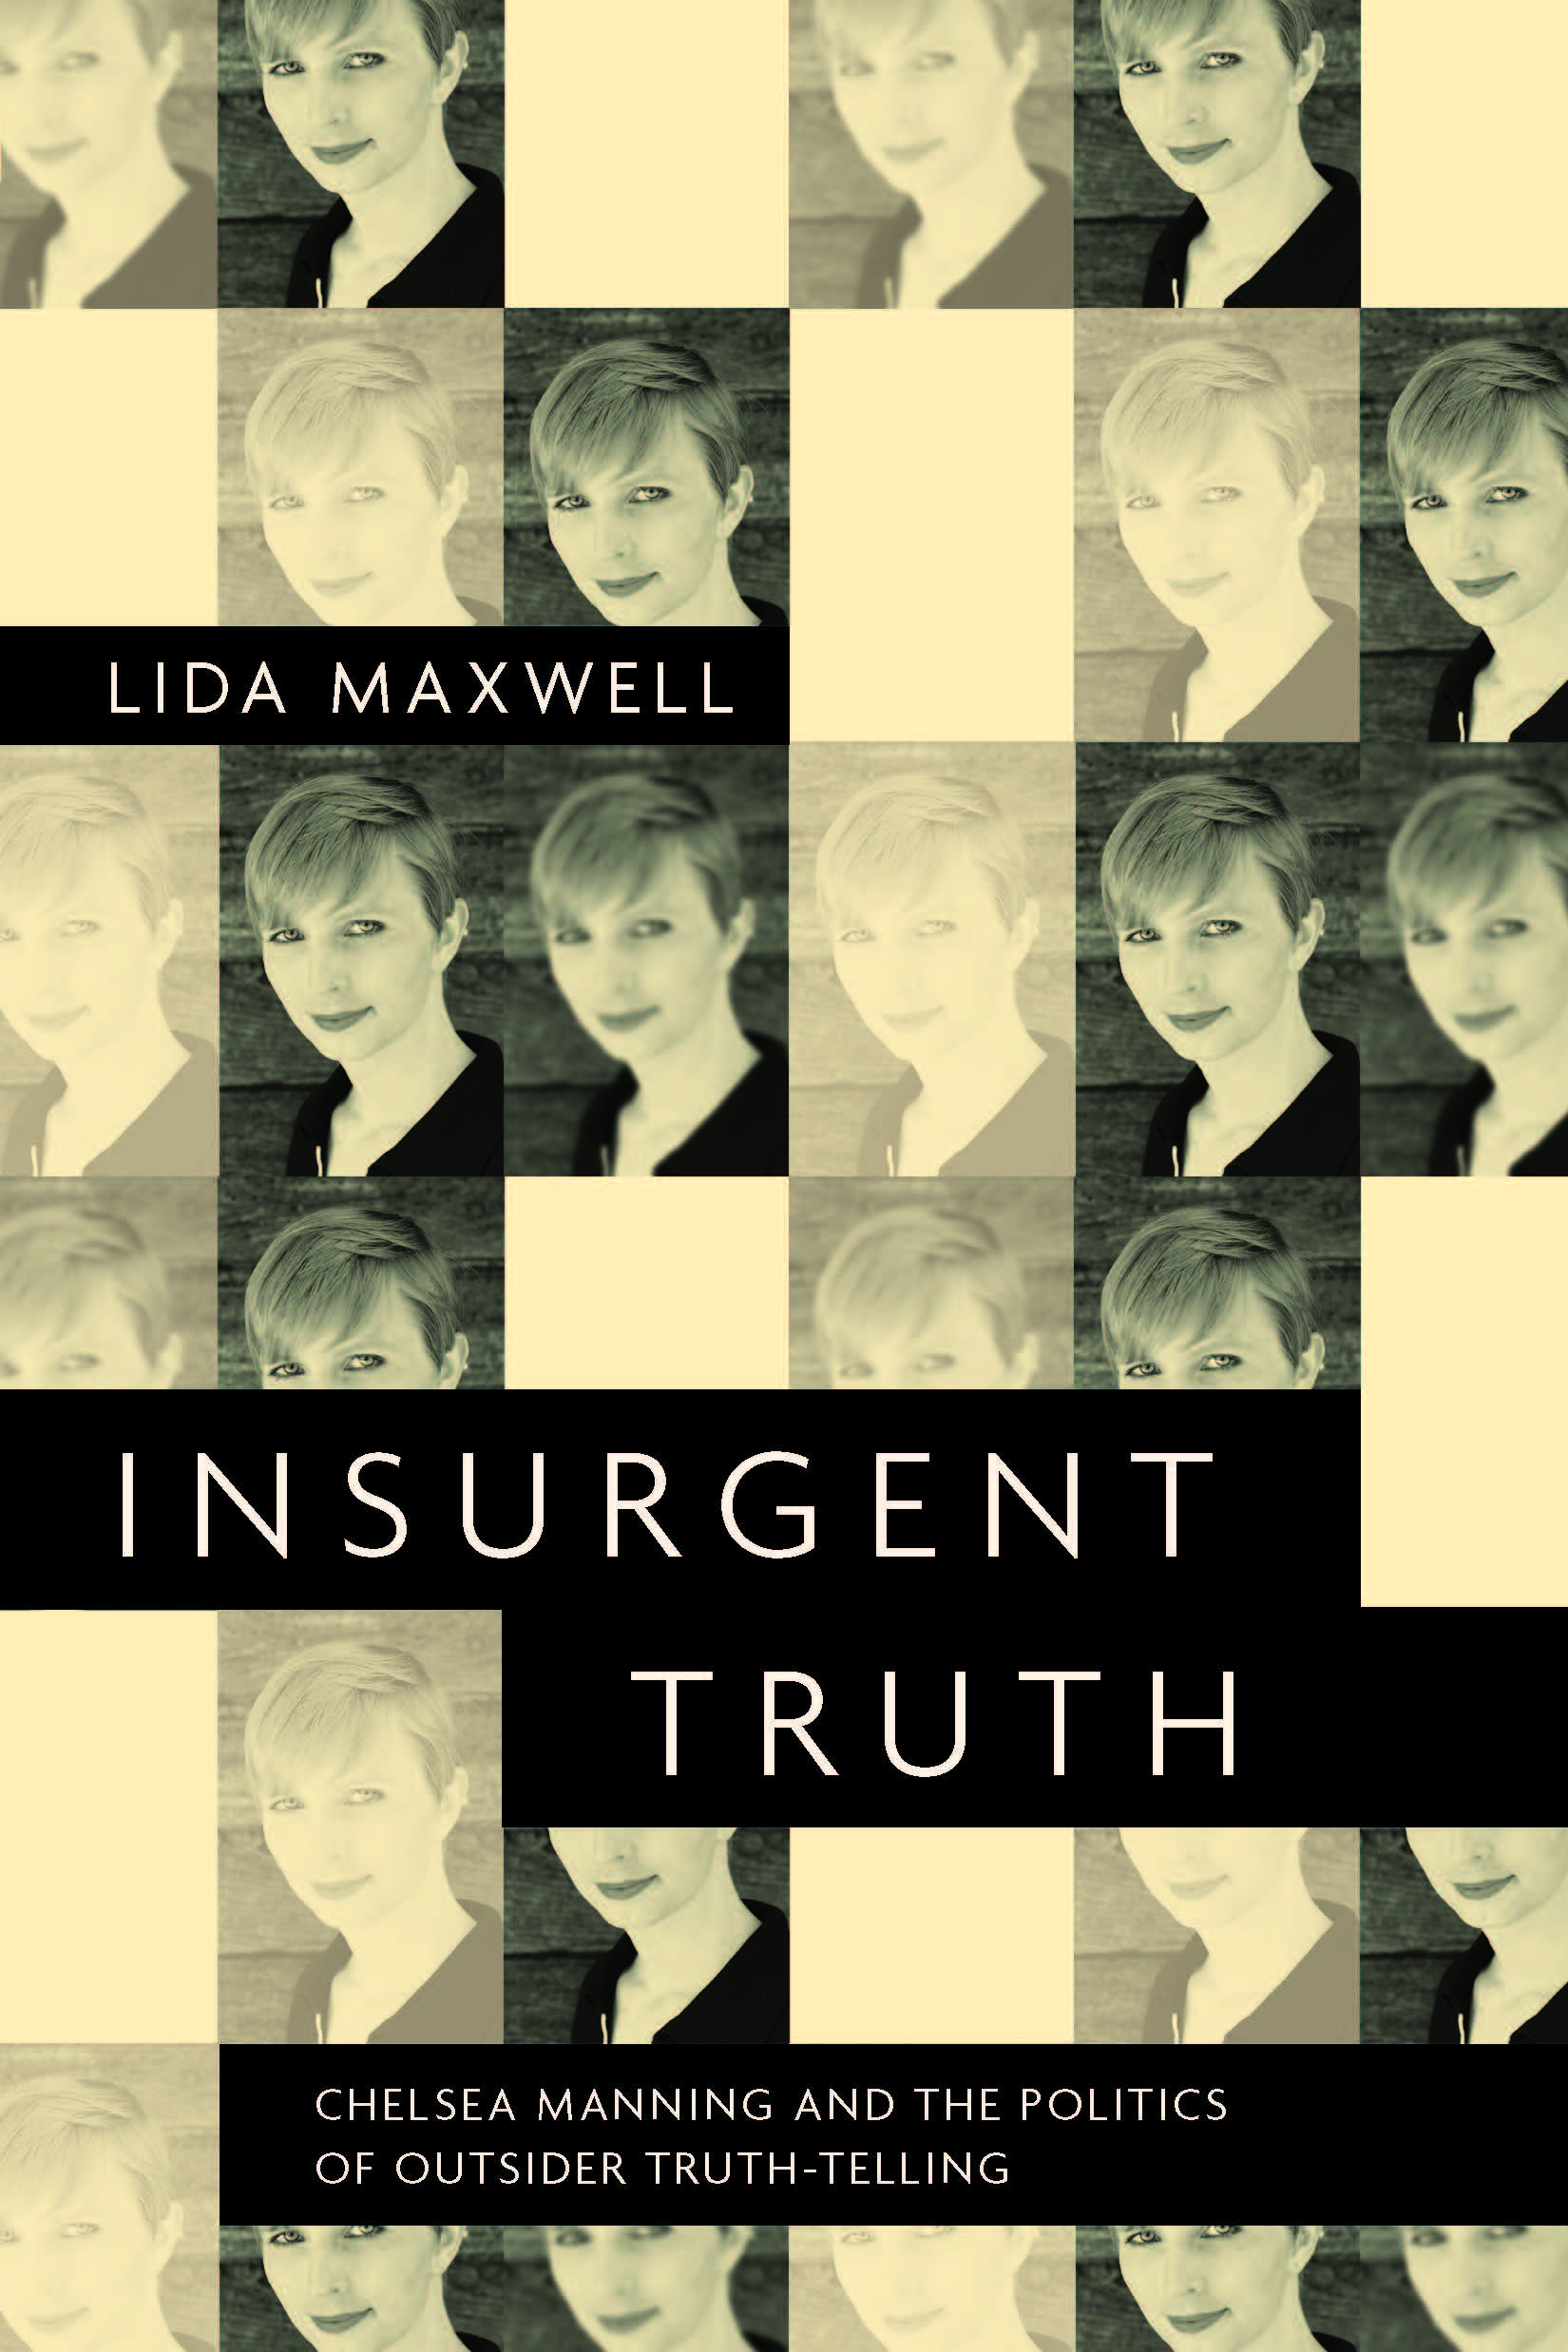 Image for event - Insurgent Truth: Chelsea Manning and the Politics of Outsider Truth-Telling